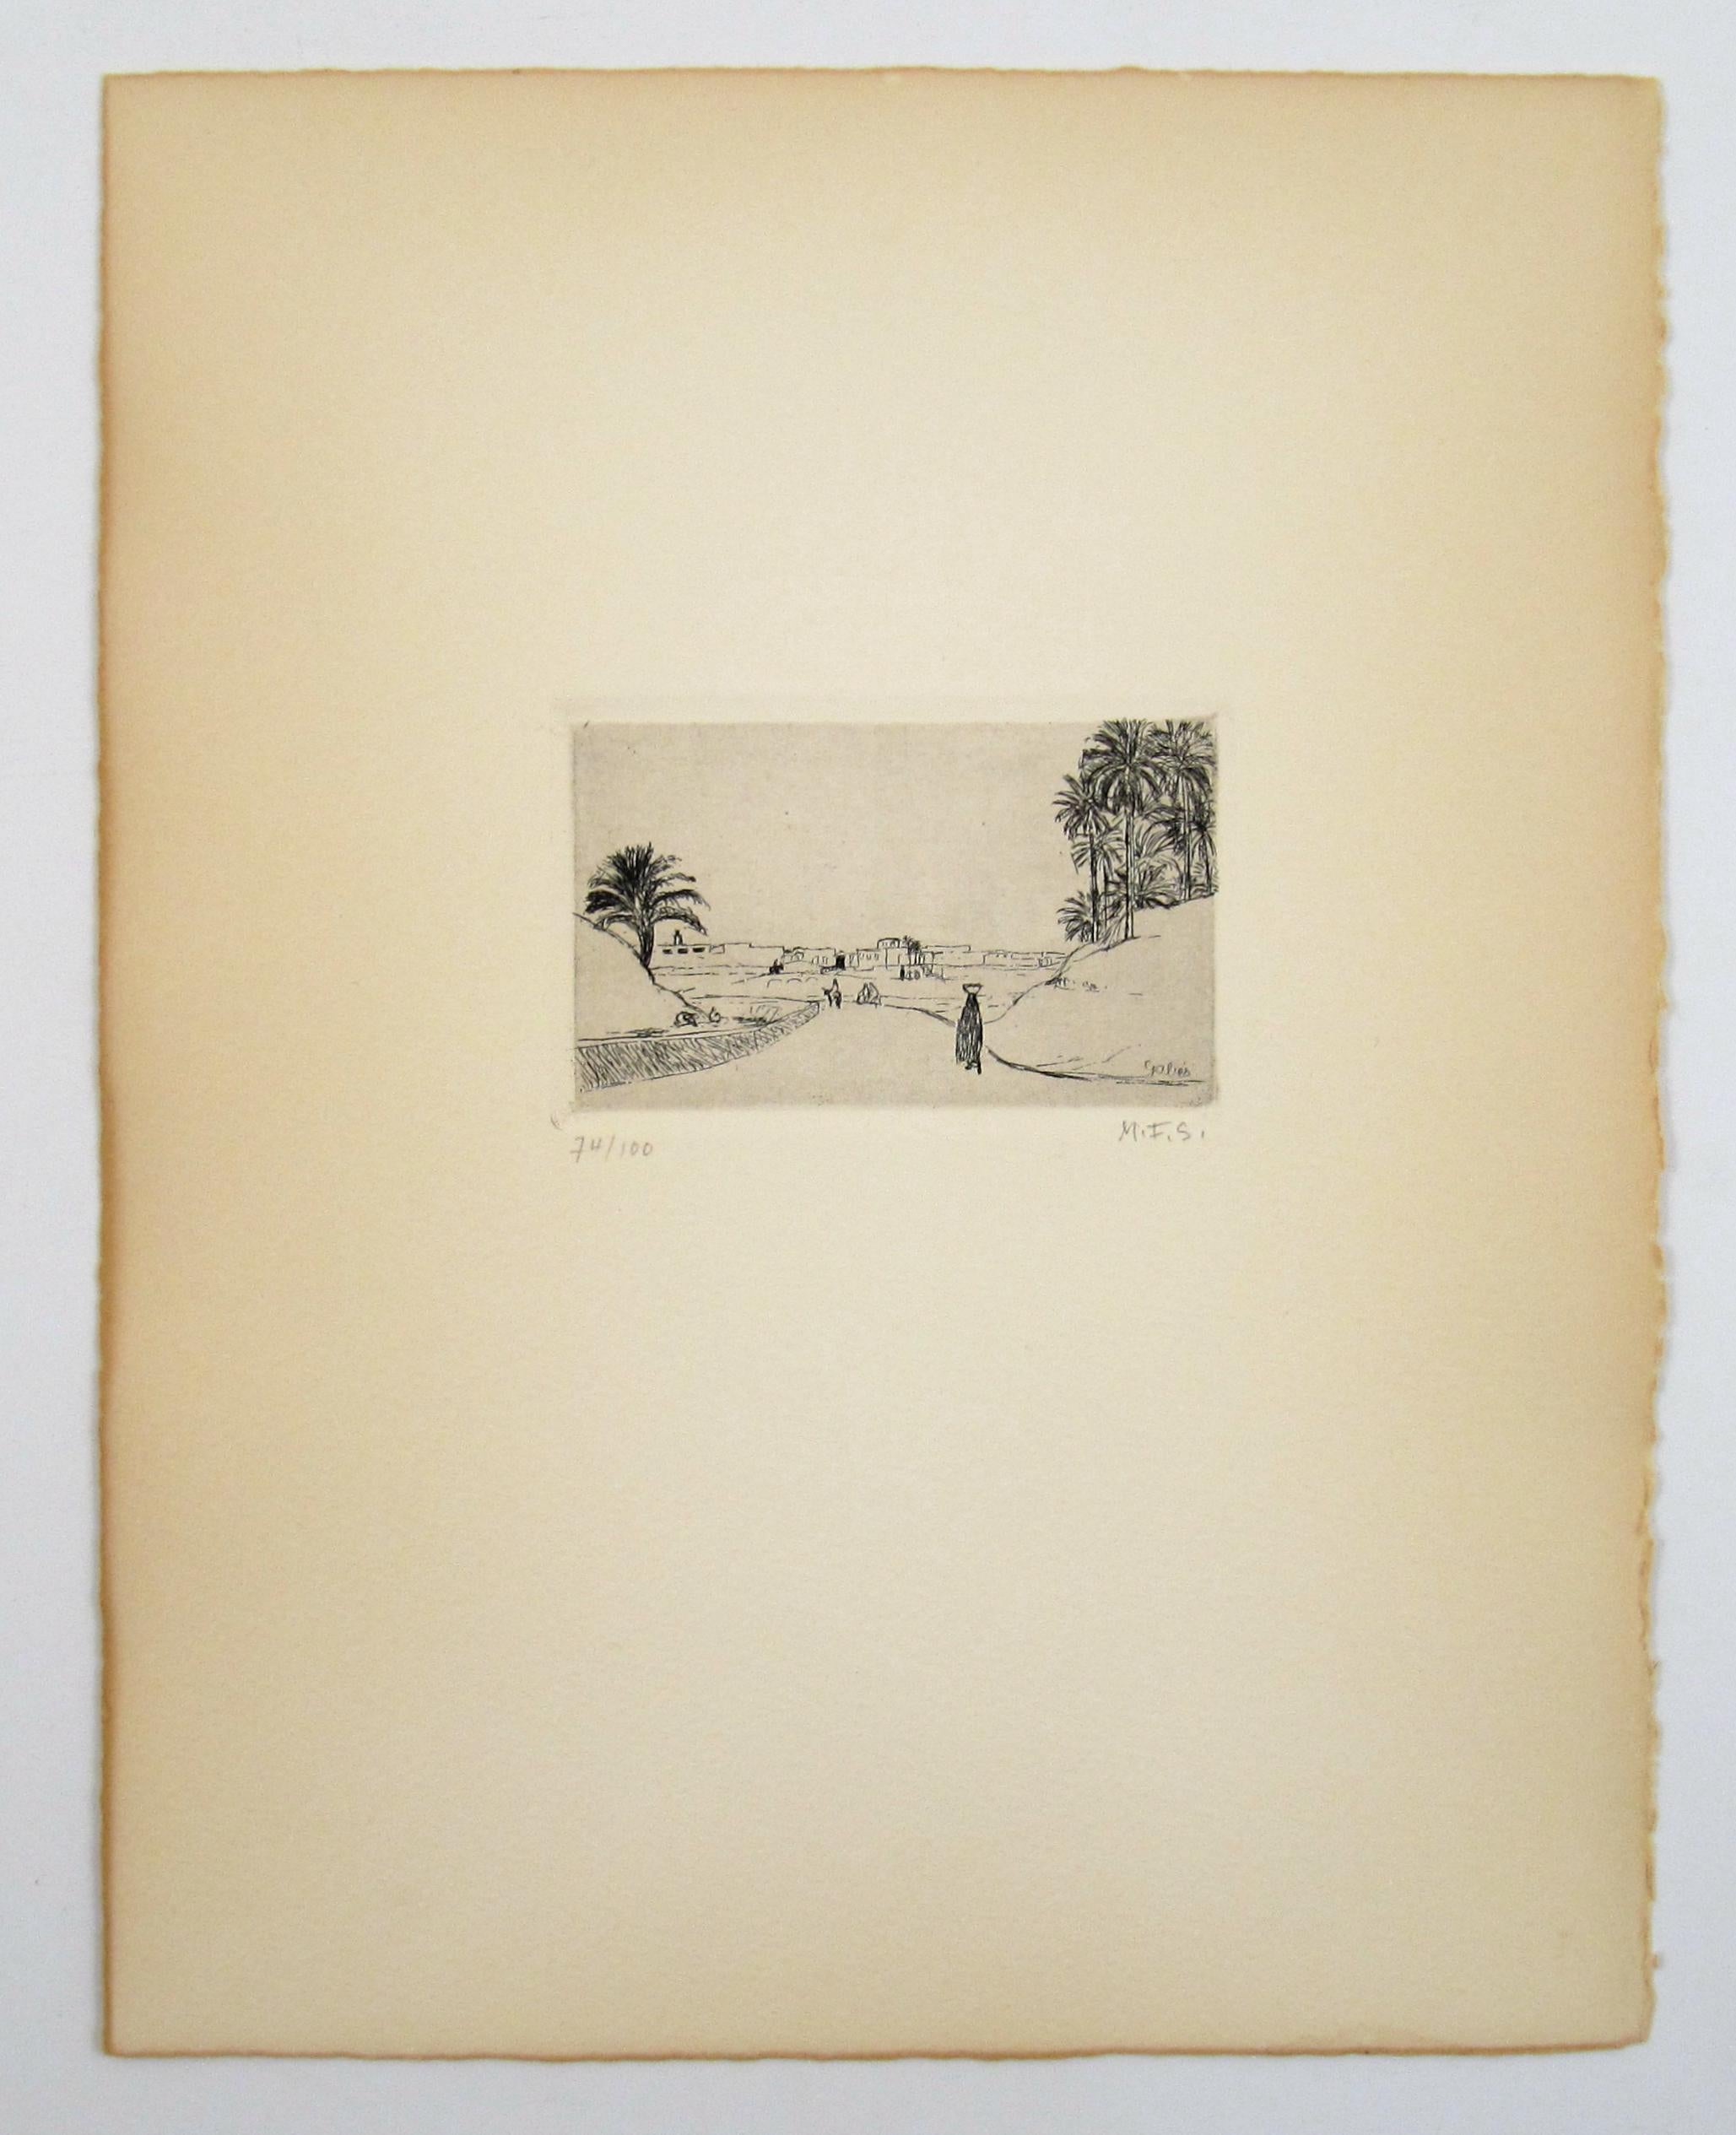 Jeanne Marguerite Frey-Surbek
(Swiss, * 23.2.1886 Delémont, † 17.5.1981 Bern)

Country Road near Gabés, Tunesia, North Africa

•	Etching
•	Platte, ca.  7 x 11 cm
•	Sheet, ca.  33 x 25.5 cm
•	Monogrammed lower right
•	Edition noted lower left